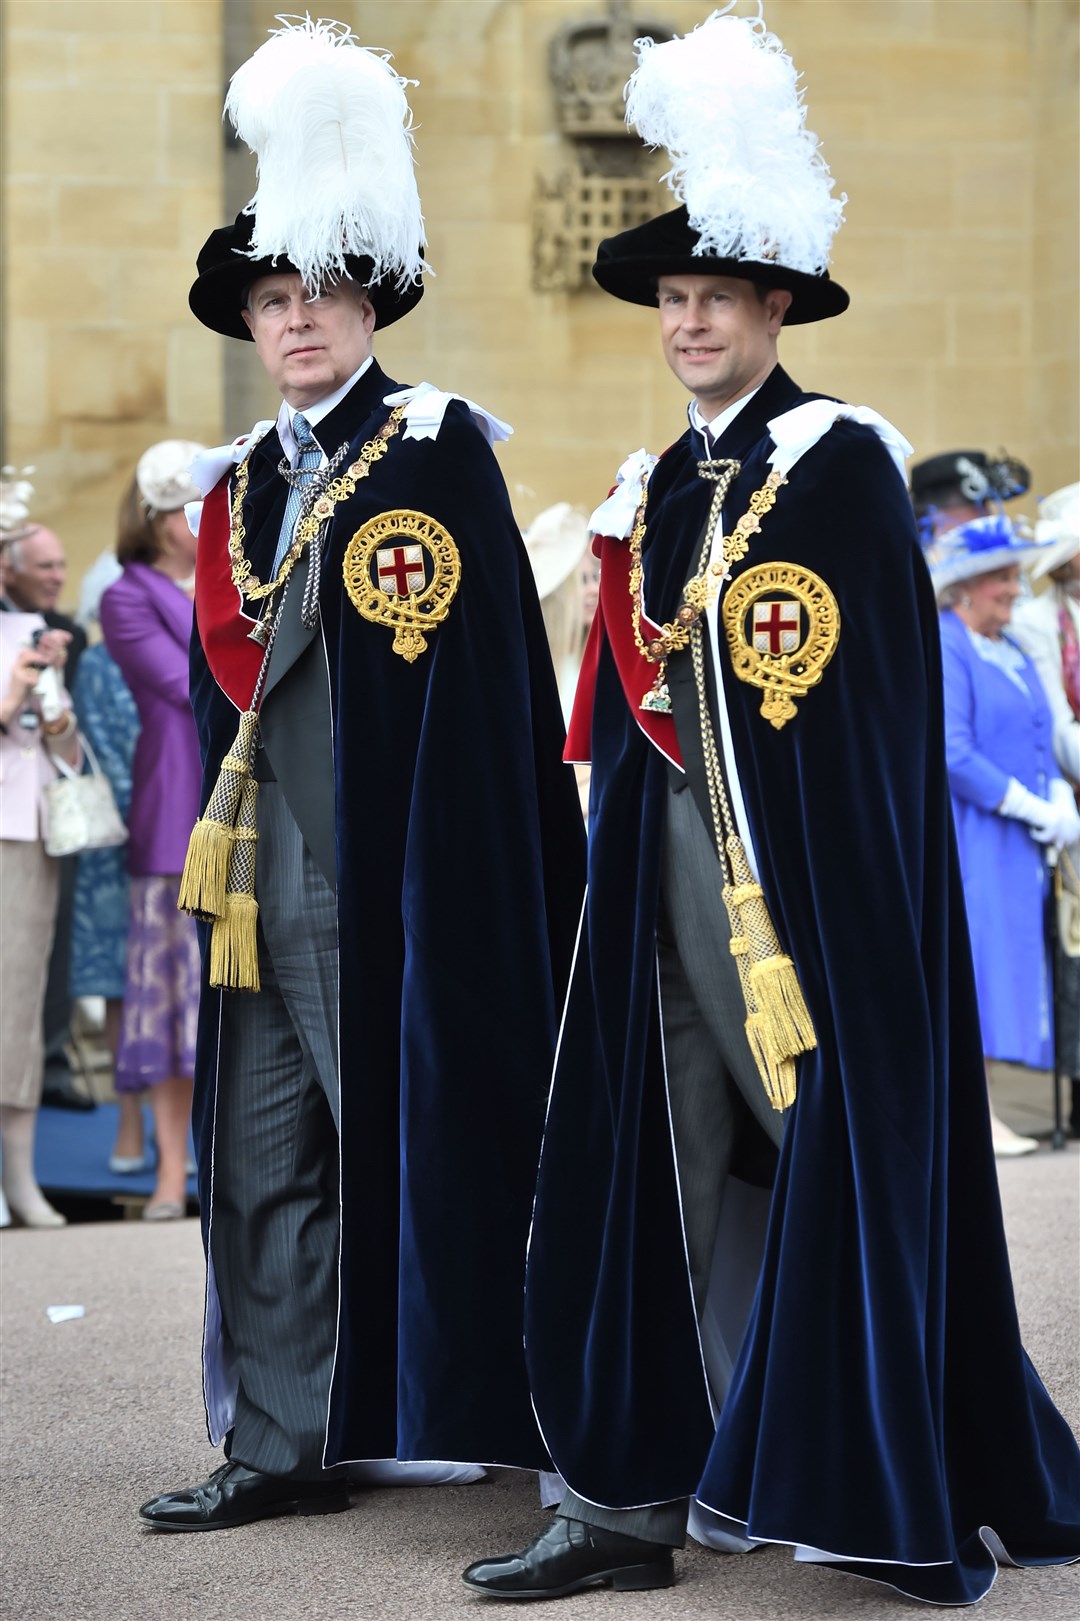 The Duke of York (left) and the Earl of Wessex at a previous Order of the Garter Service (Eddie Mulholland/The Daily Telegraph/PA)